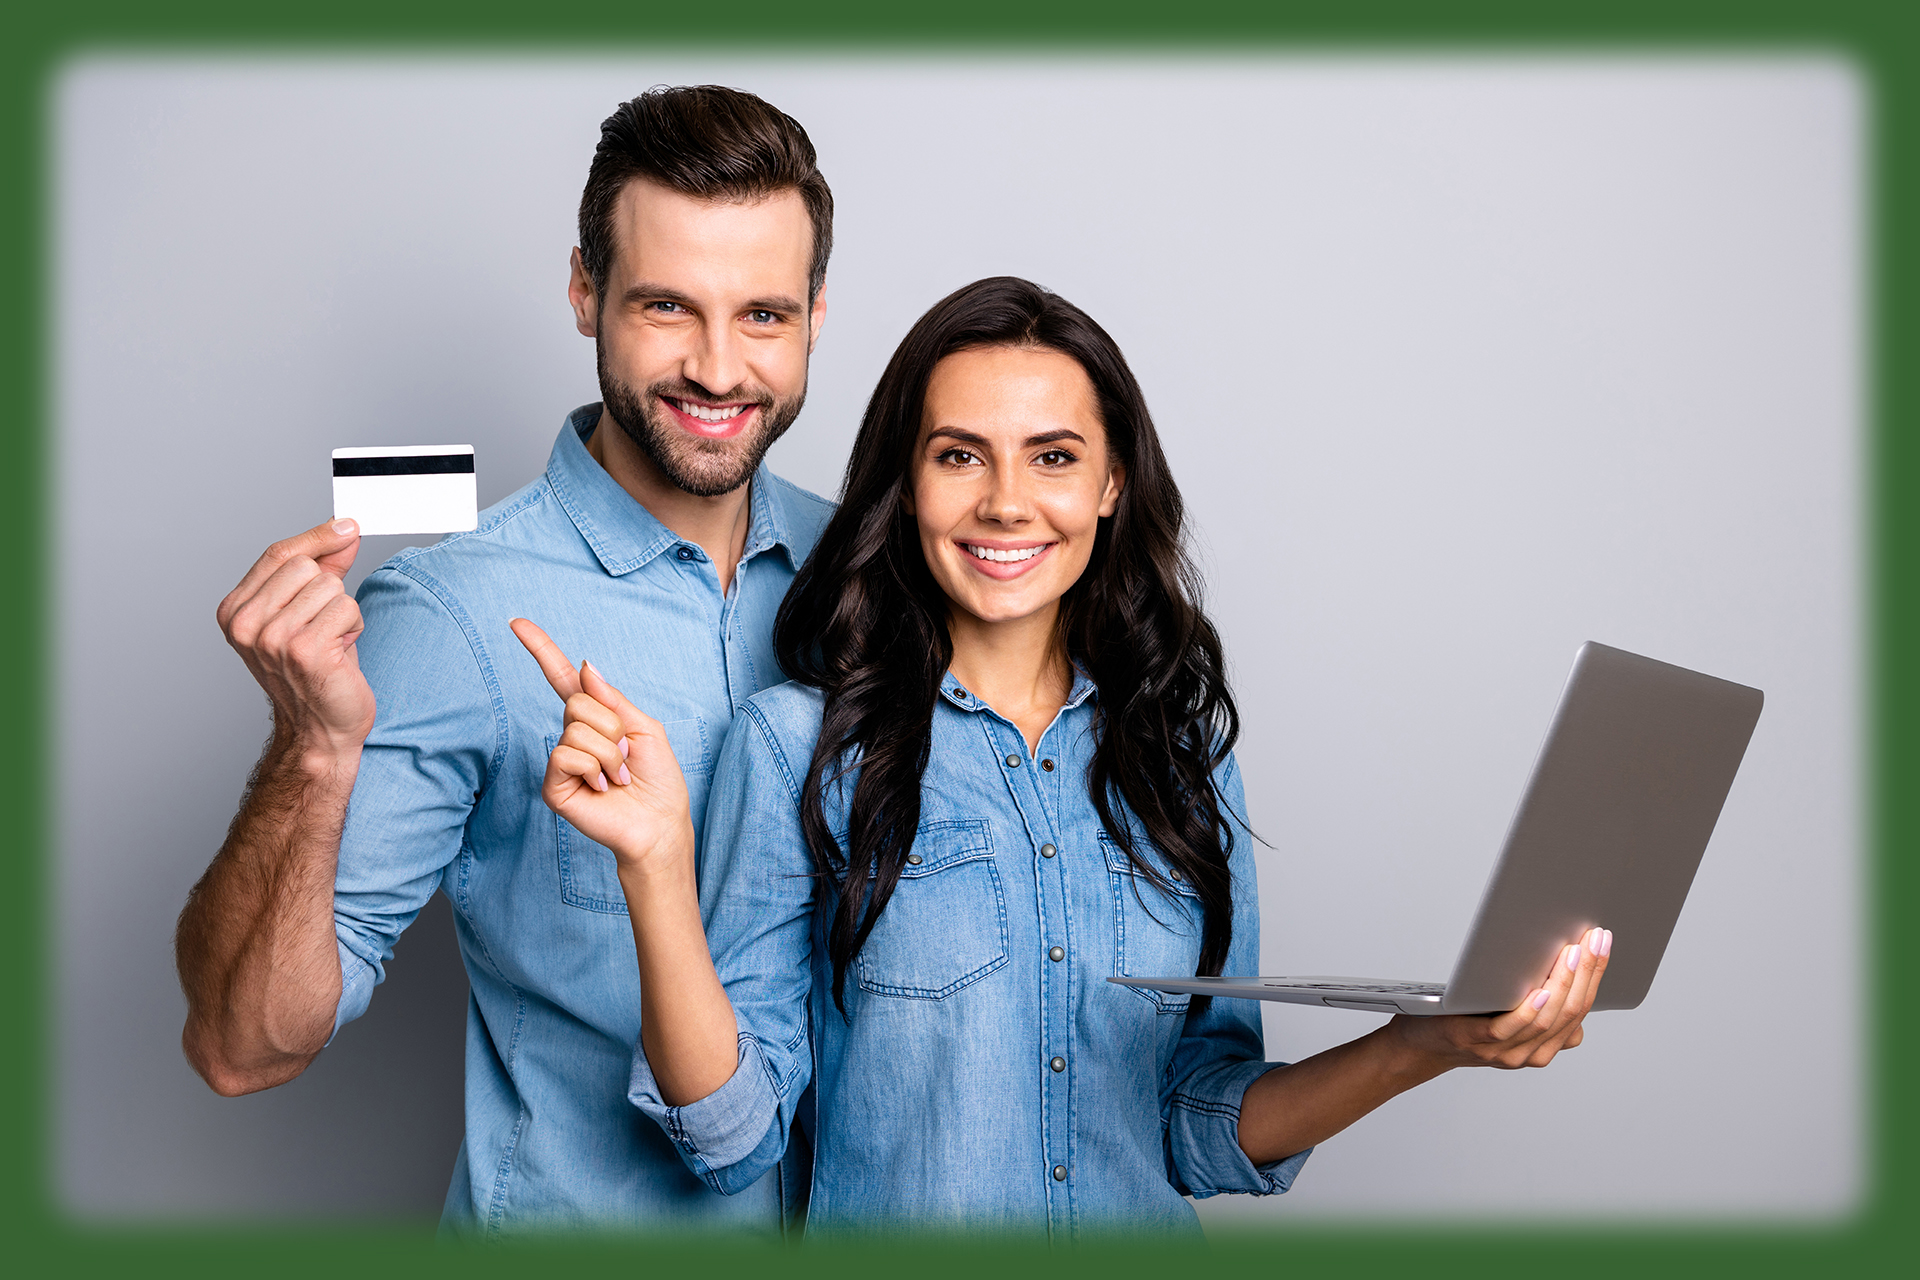 man holding debit card, woman holding laptop and smiling at camera